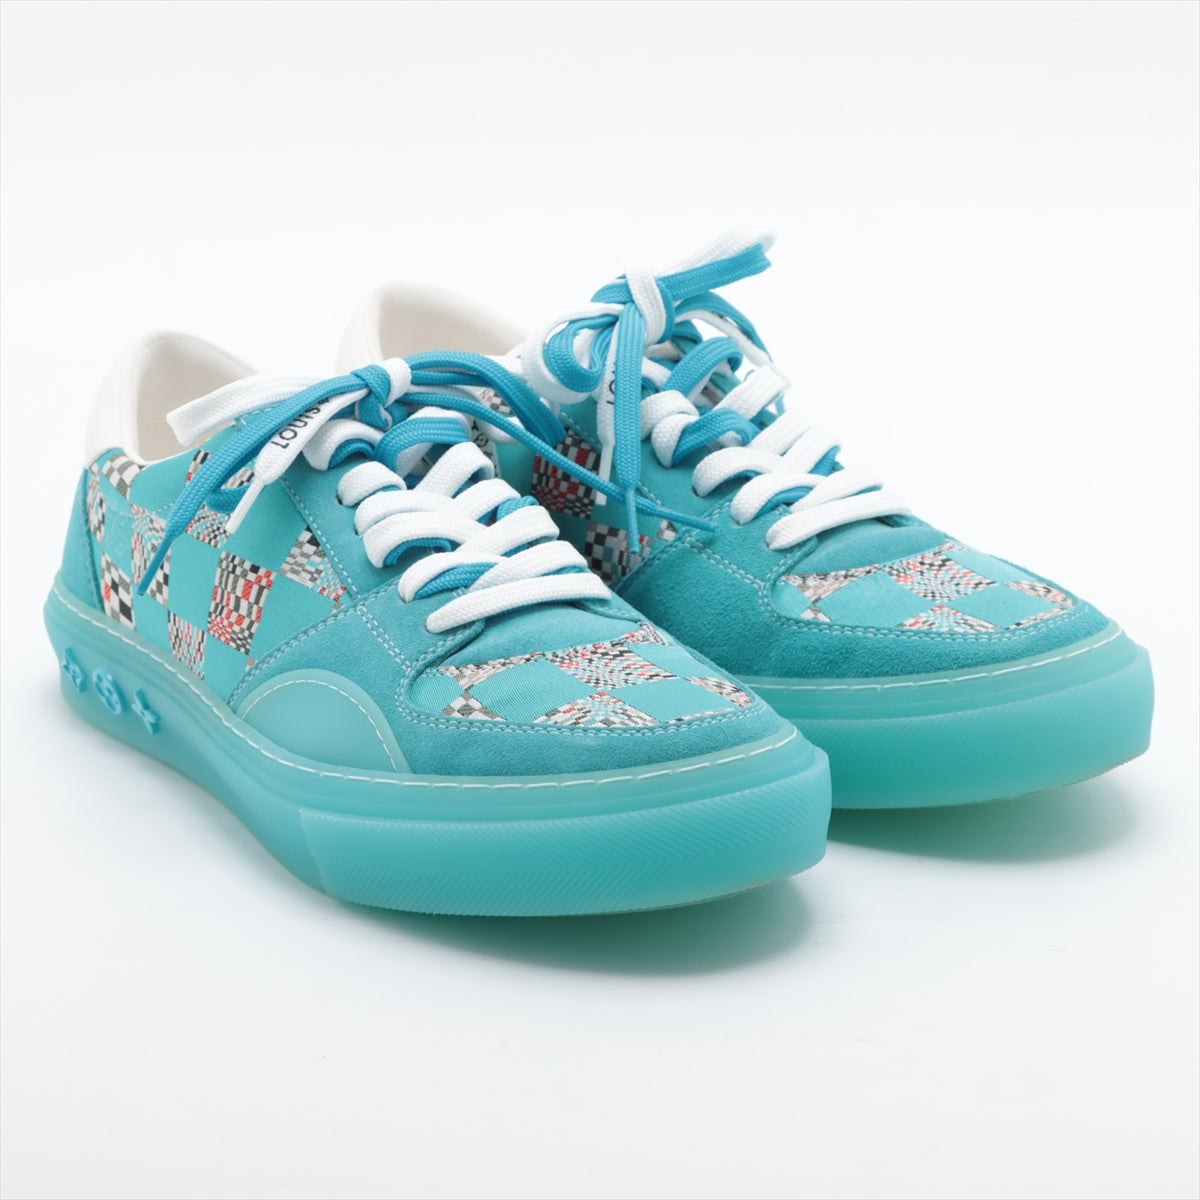 Louis Vuitton LV Oryline 21 years Leather x fabric Sneakers 6.5 Men's Light blue LD0221